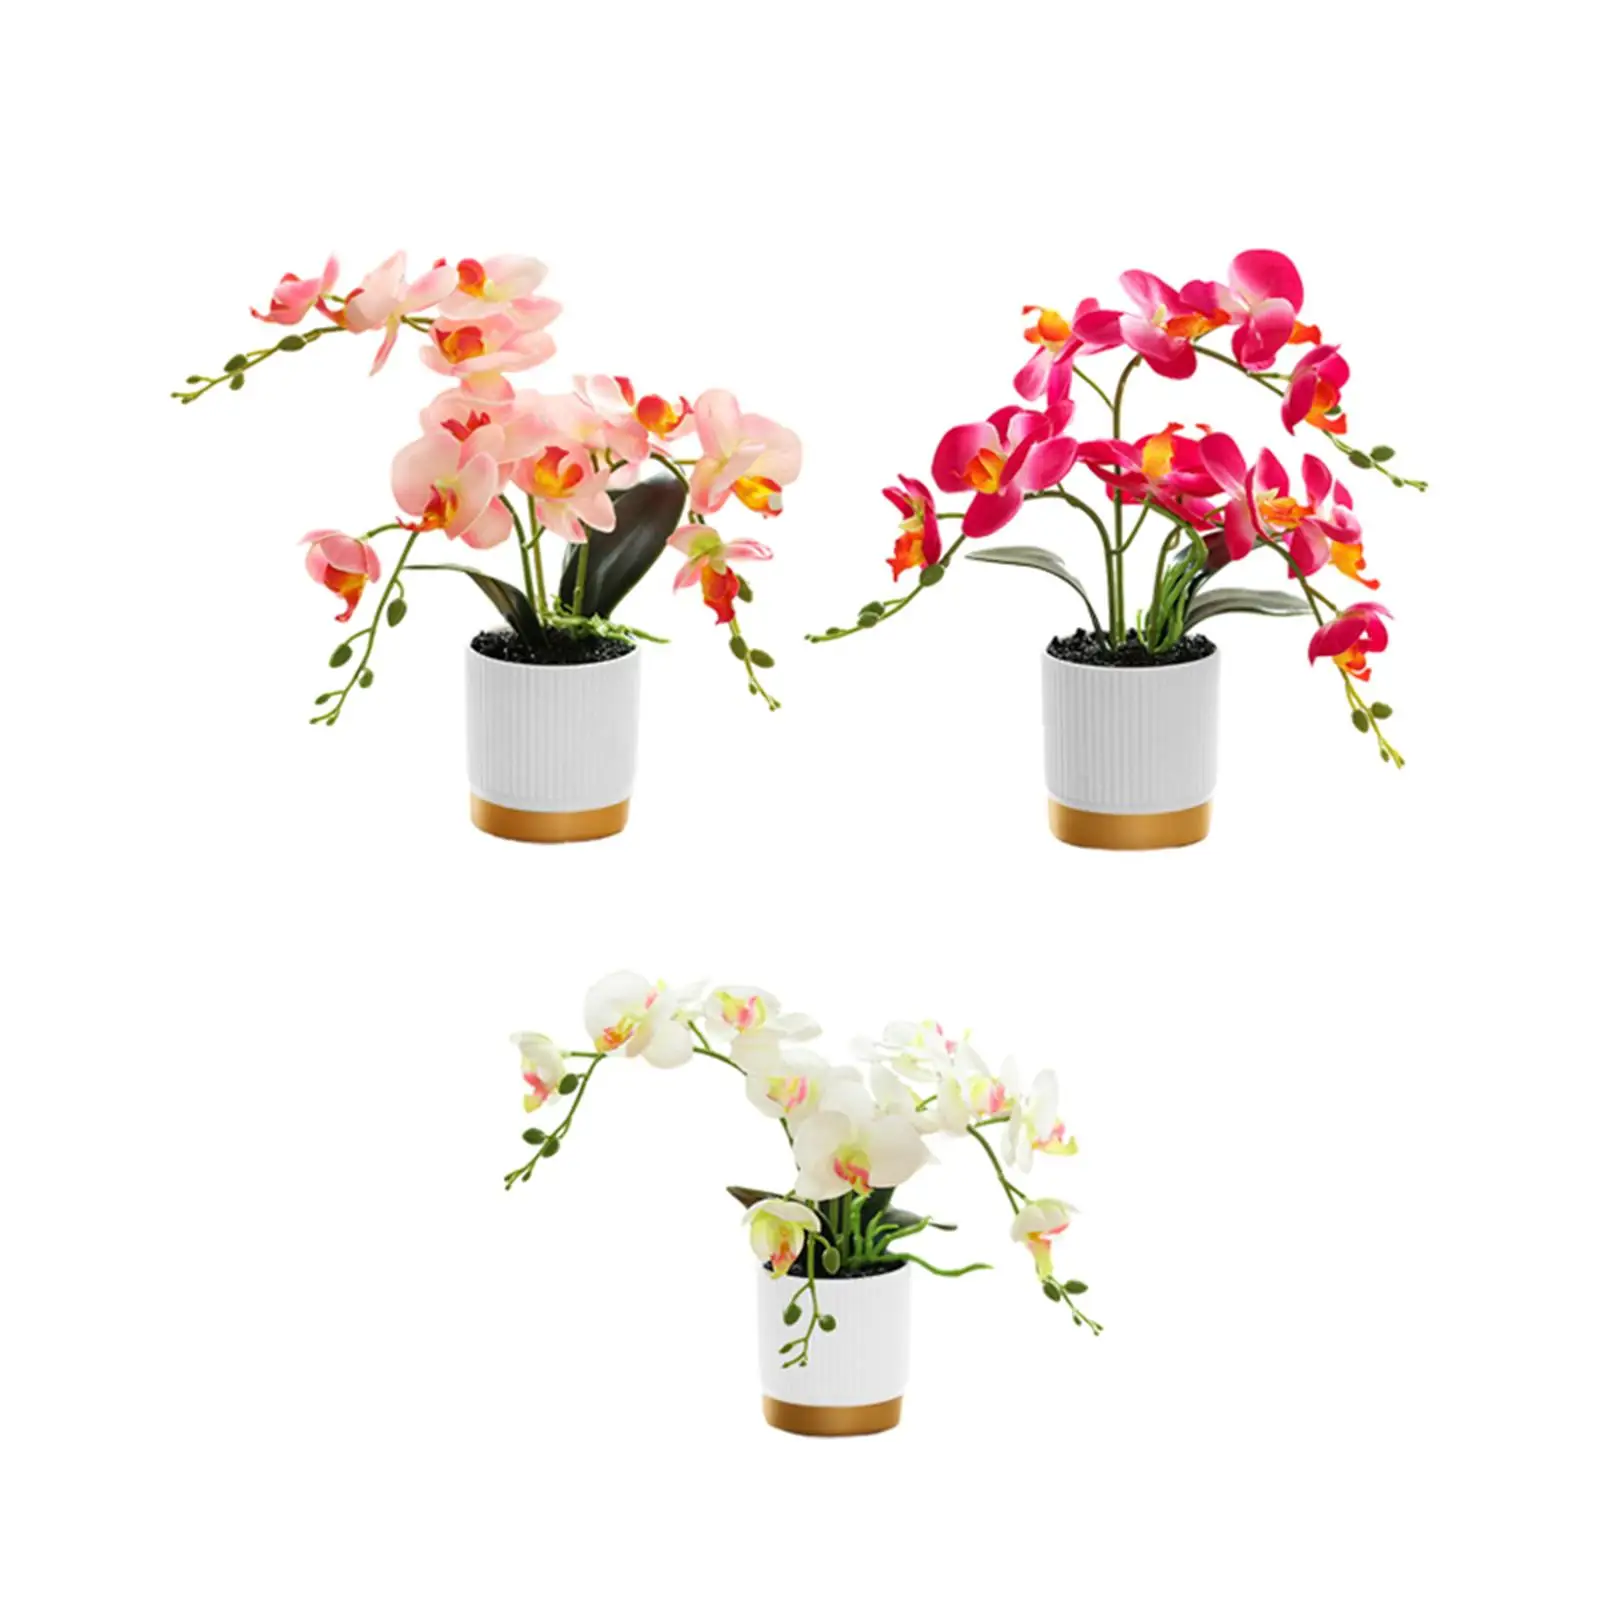 Artificial Flower in Pot Potted Plants Easy to Clean Ornament Fake Orchid Bonsai for Garden Bathroom Spring Festival Kitchen